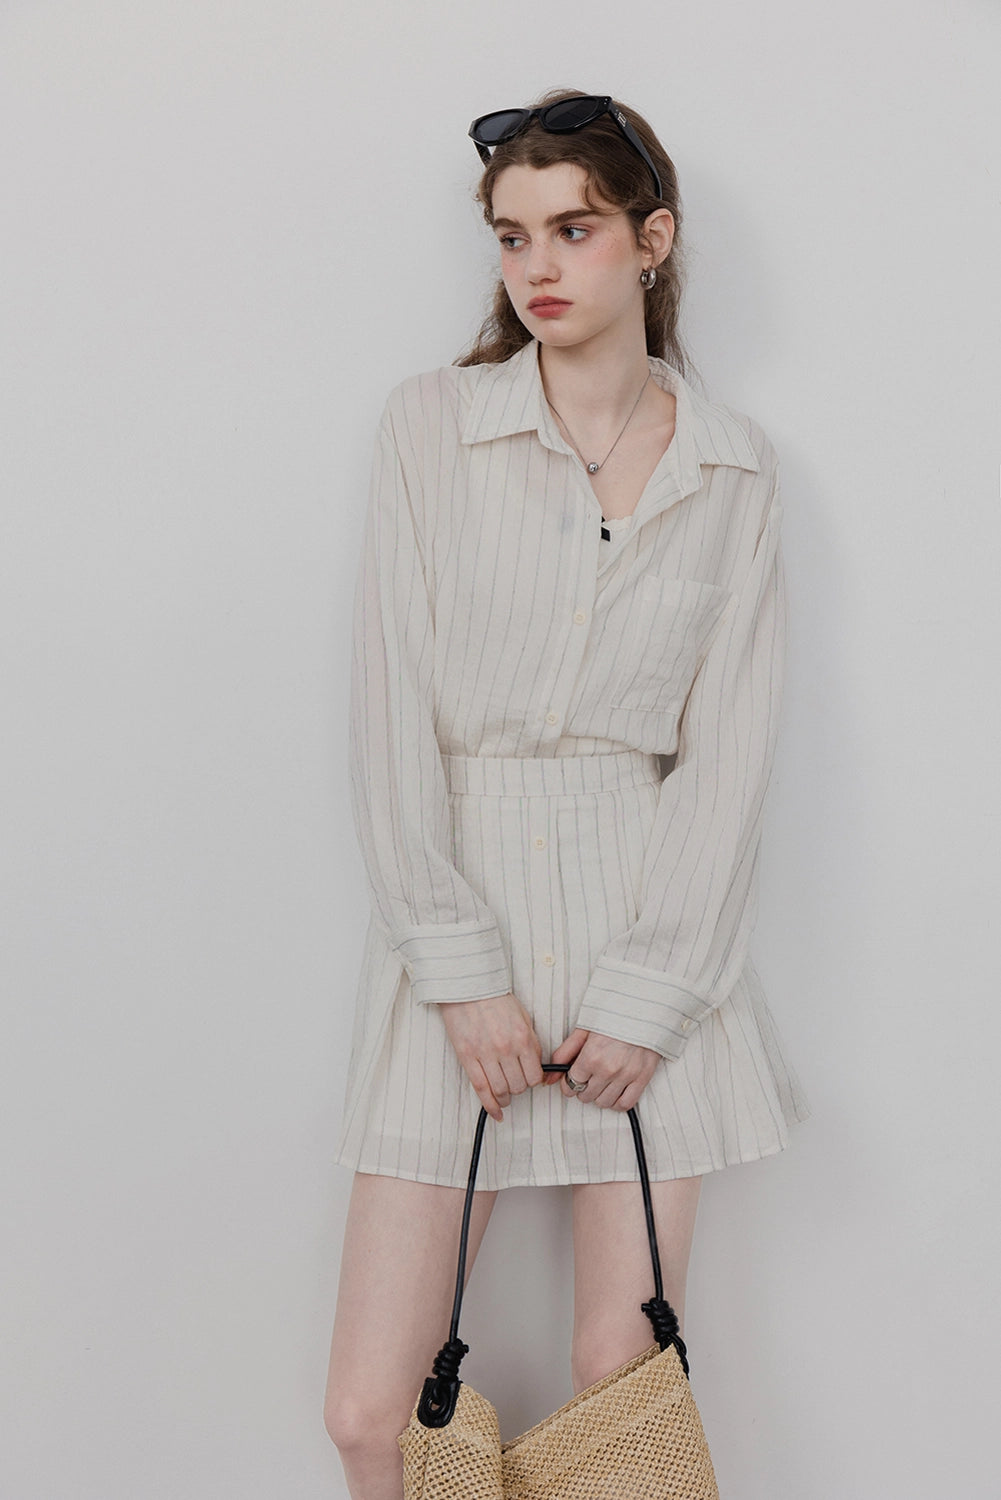 Women's Striped Shirt with Pleated Skirt Set